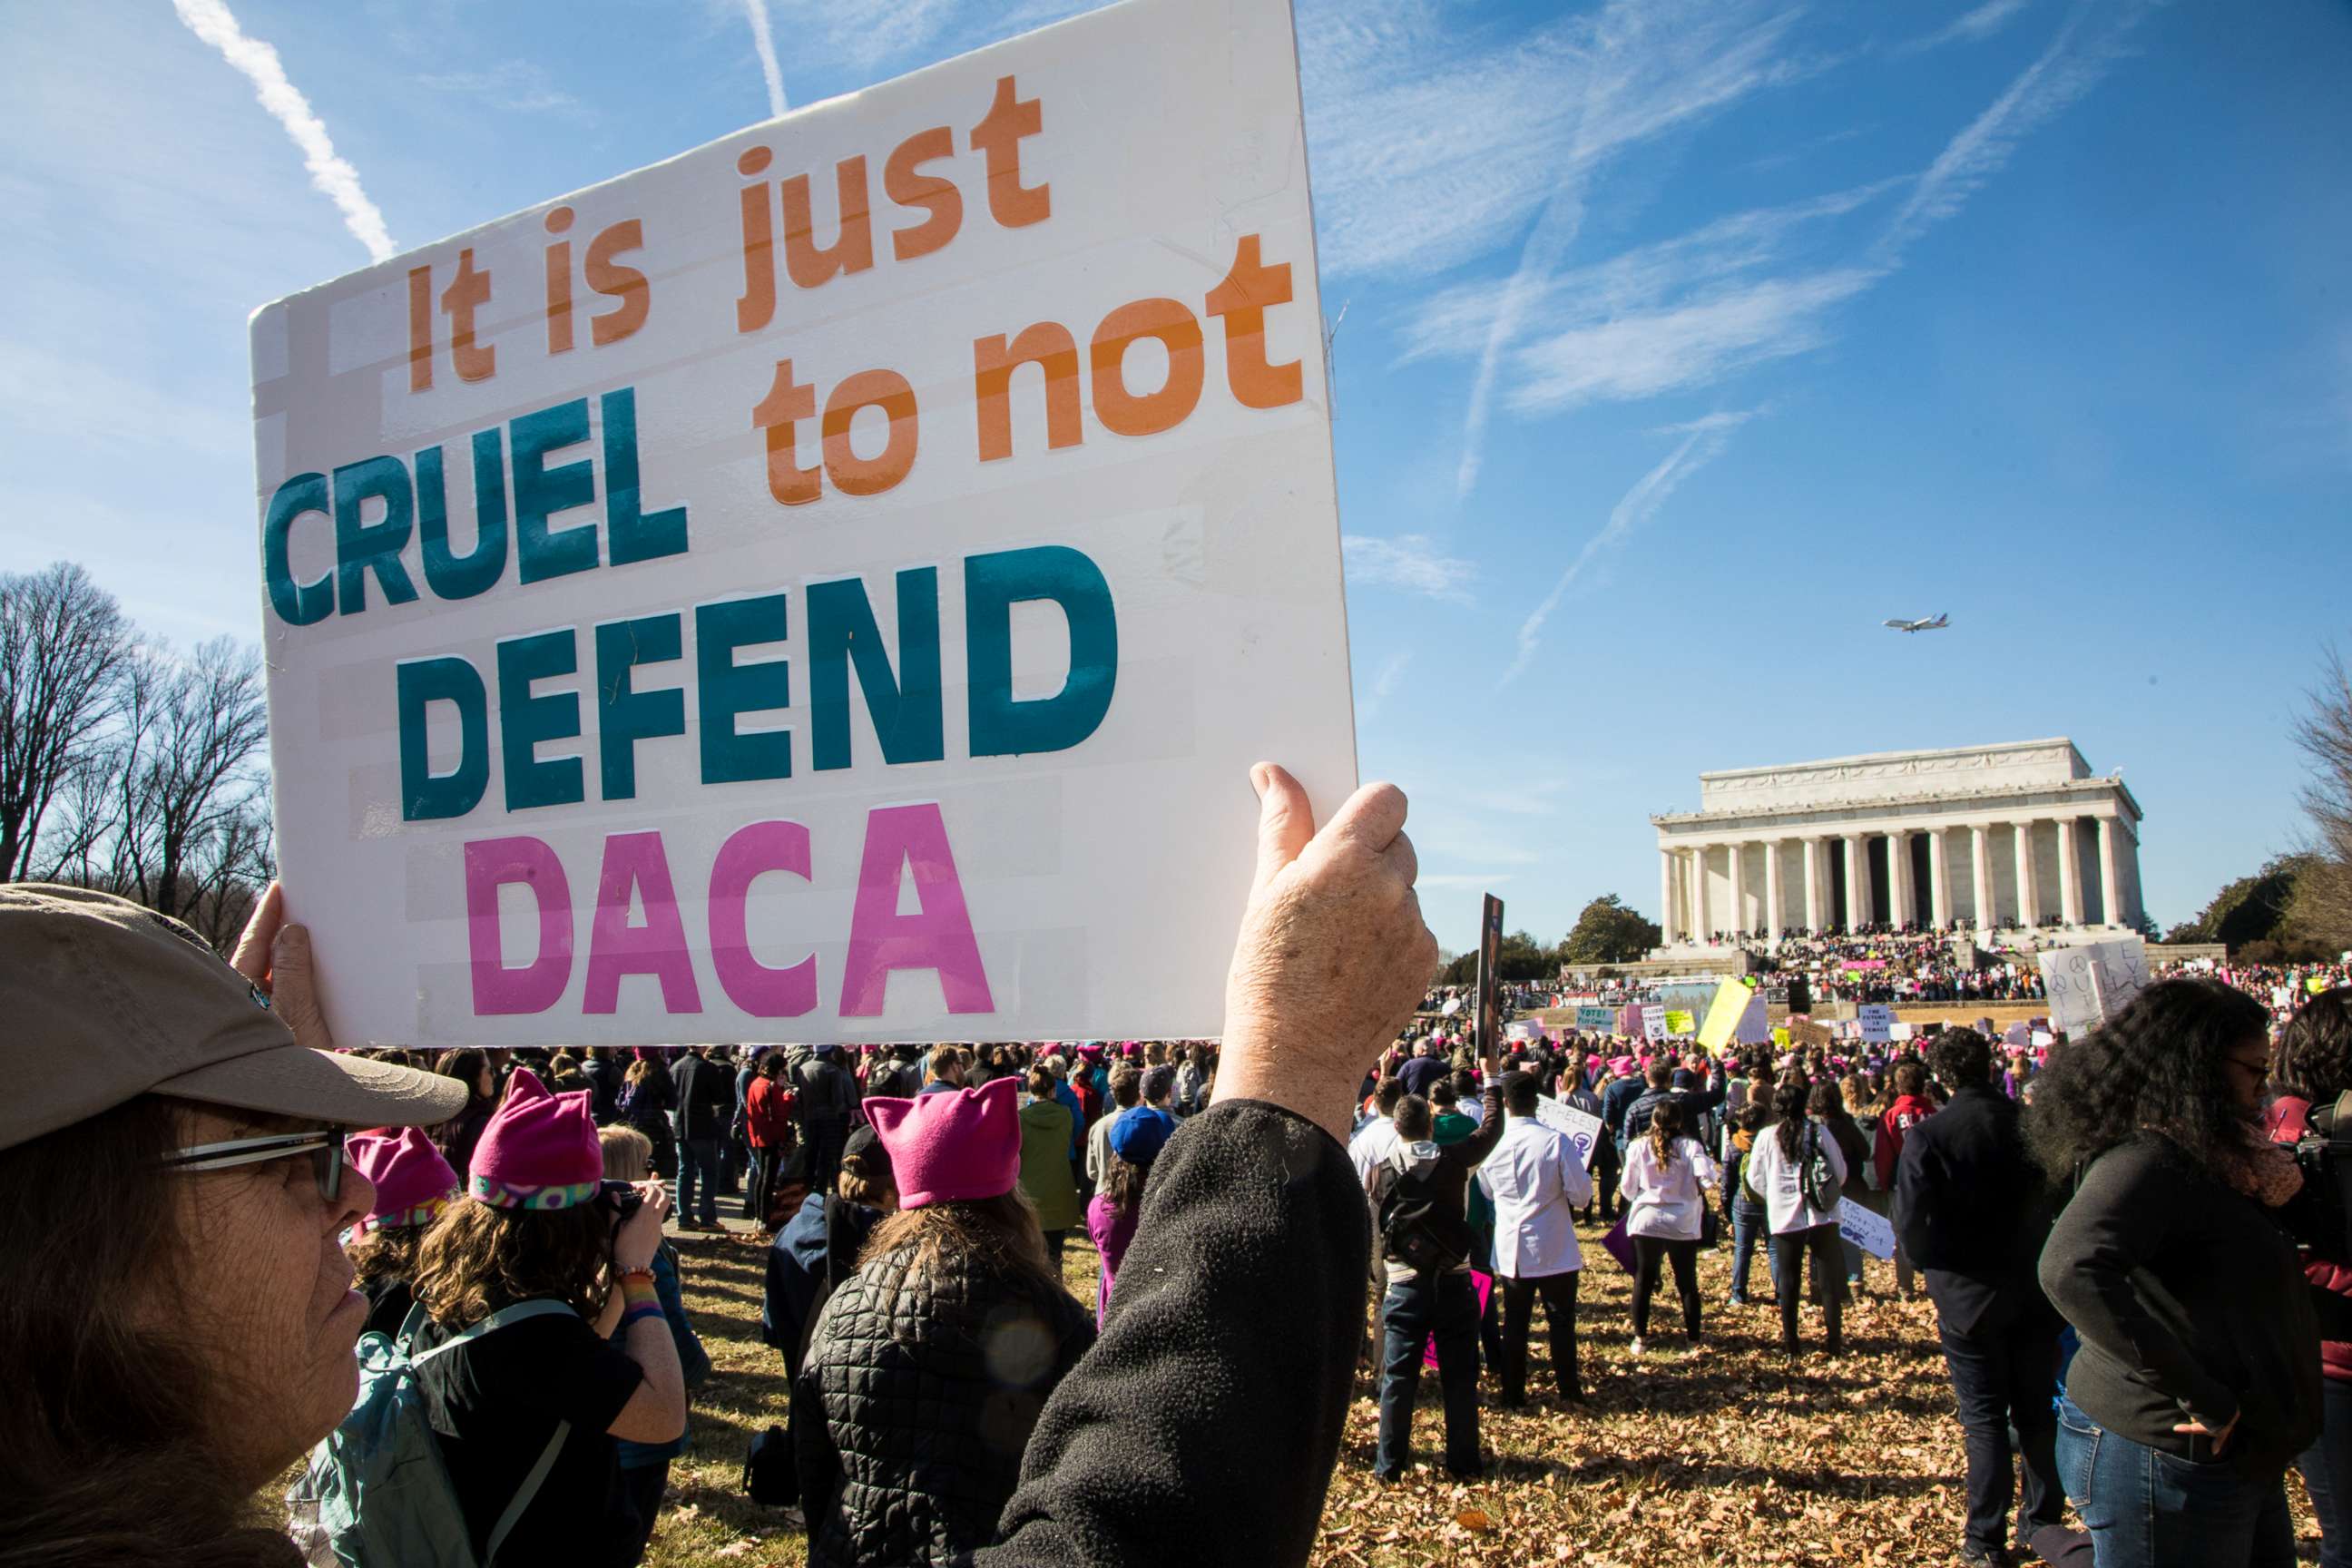 PHOTO: A demonstrator holds a sign saying "It is just cruel to not defend DACA" as thousands of activists gathered on the National Mall and marched to the White House for the 2018 Women's March on Washington D.C., Jan. 20, 2018.